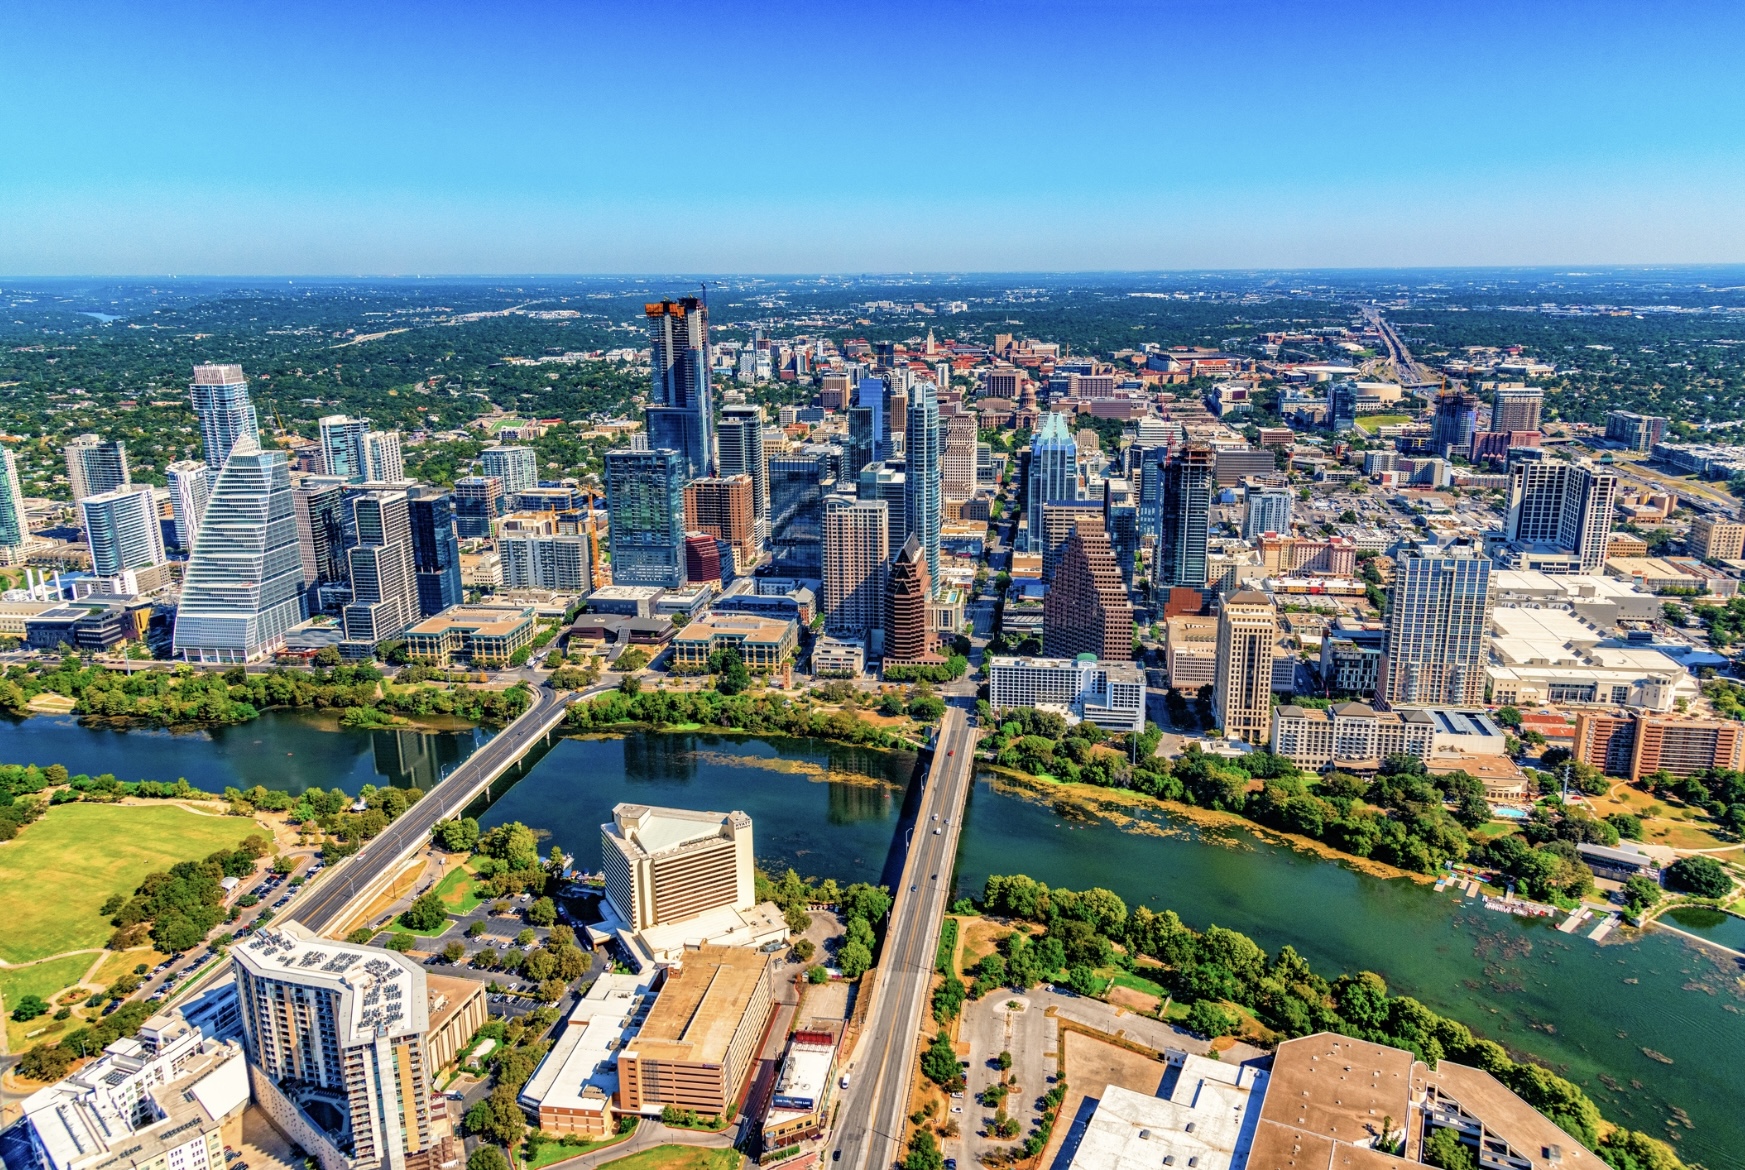 Air Canada has launched nonstop flights from Montreal to Austin, Texas